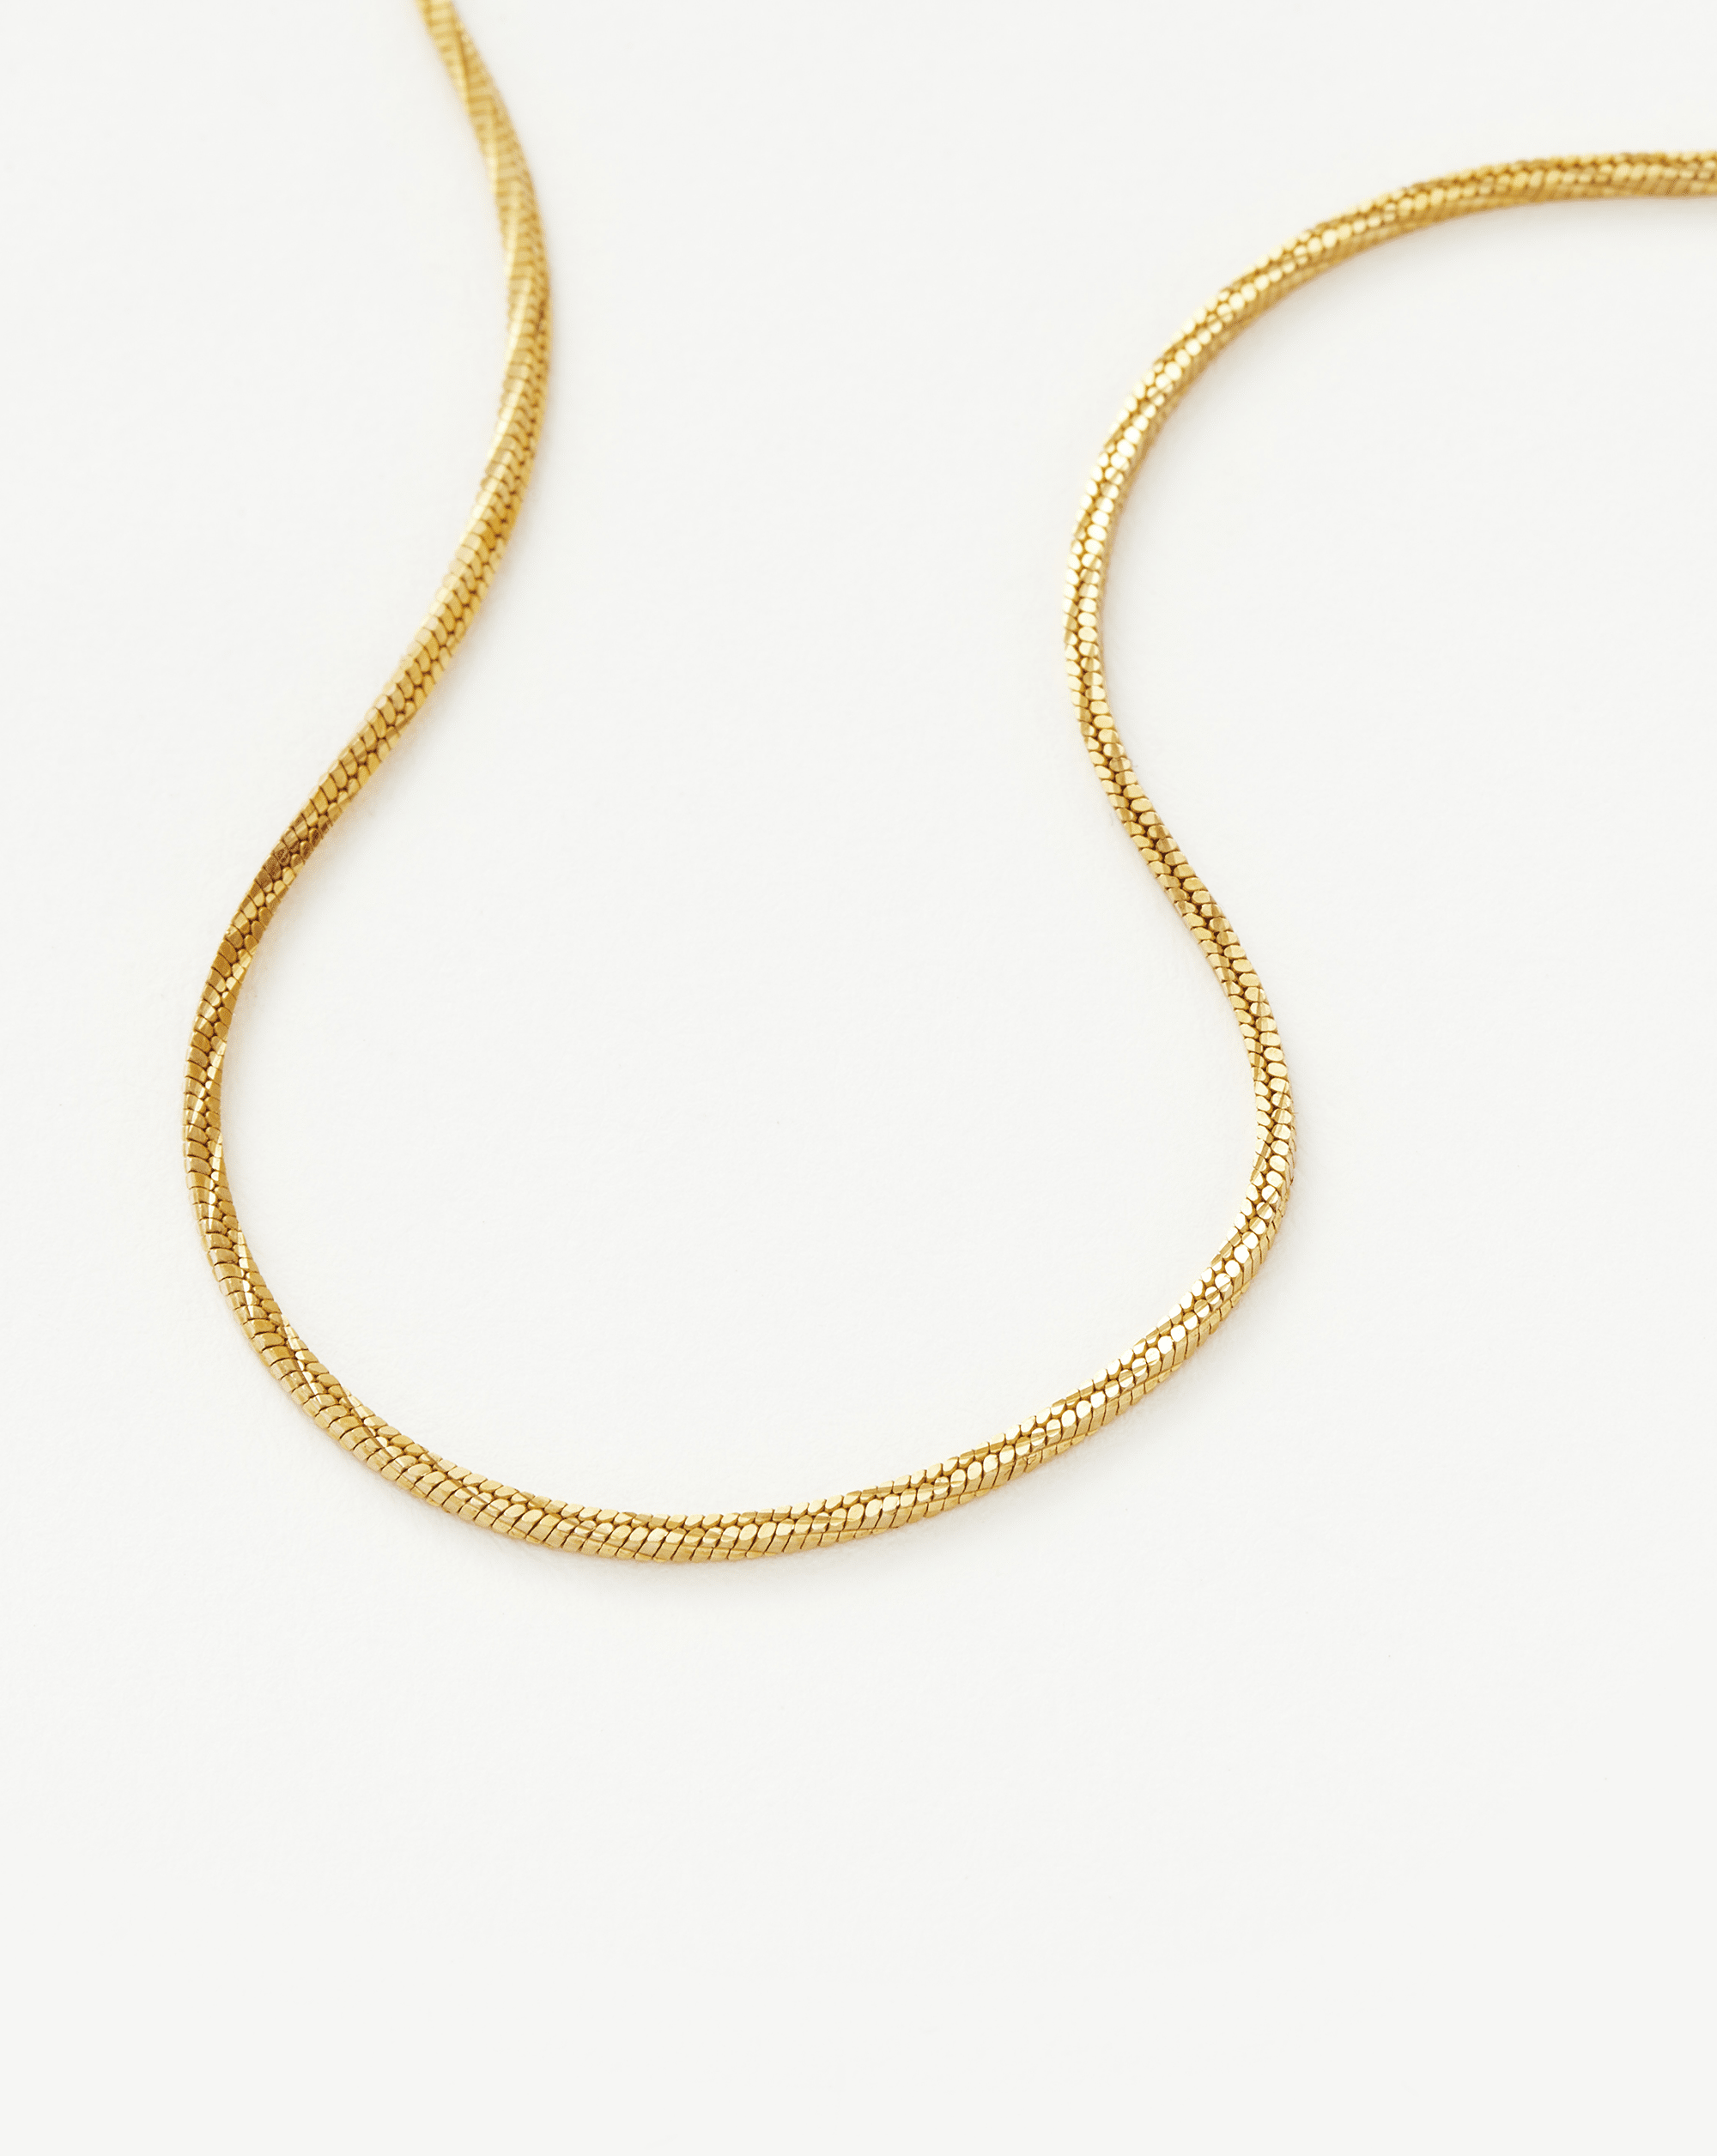 Camail snake chain necklace